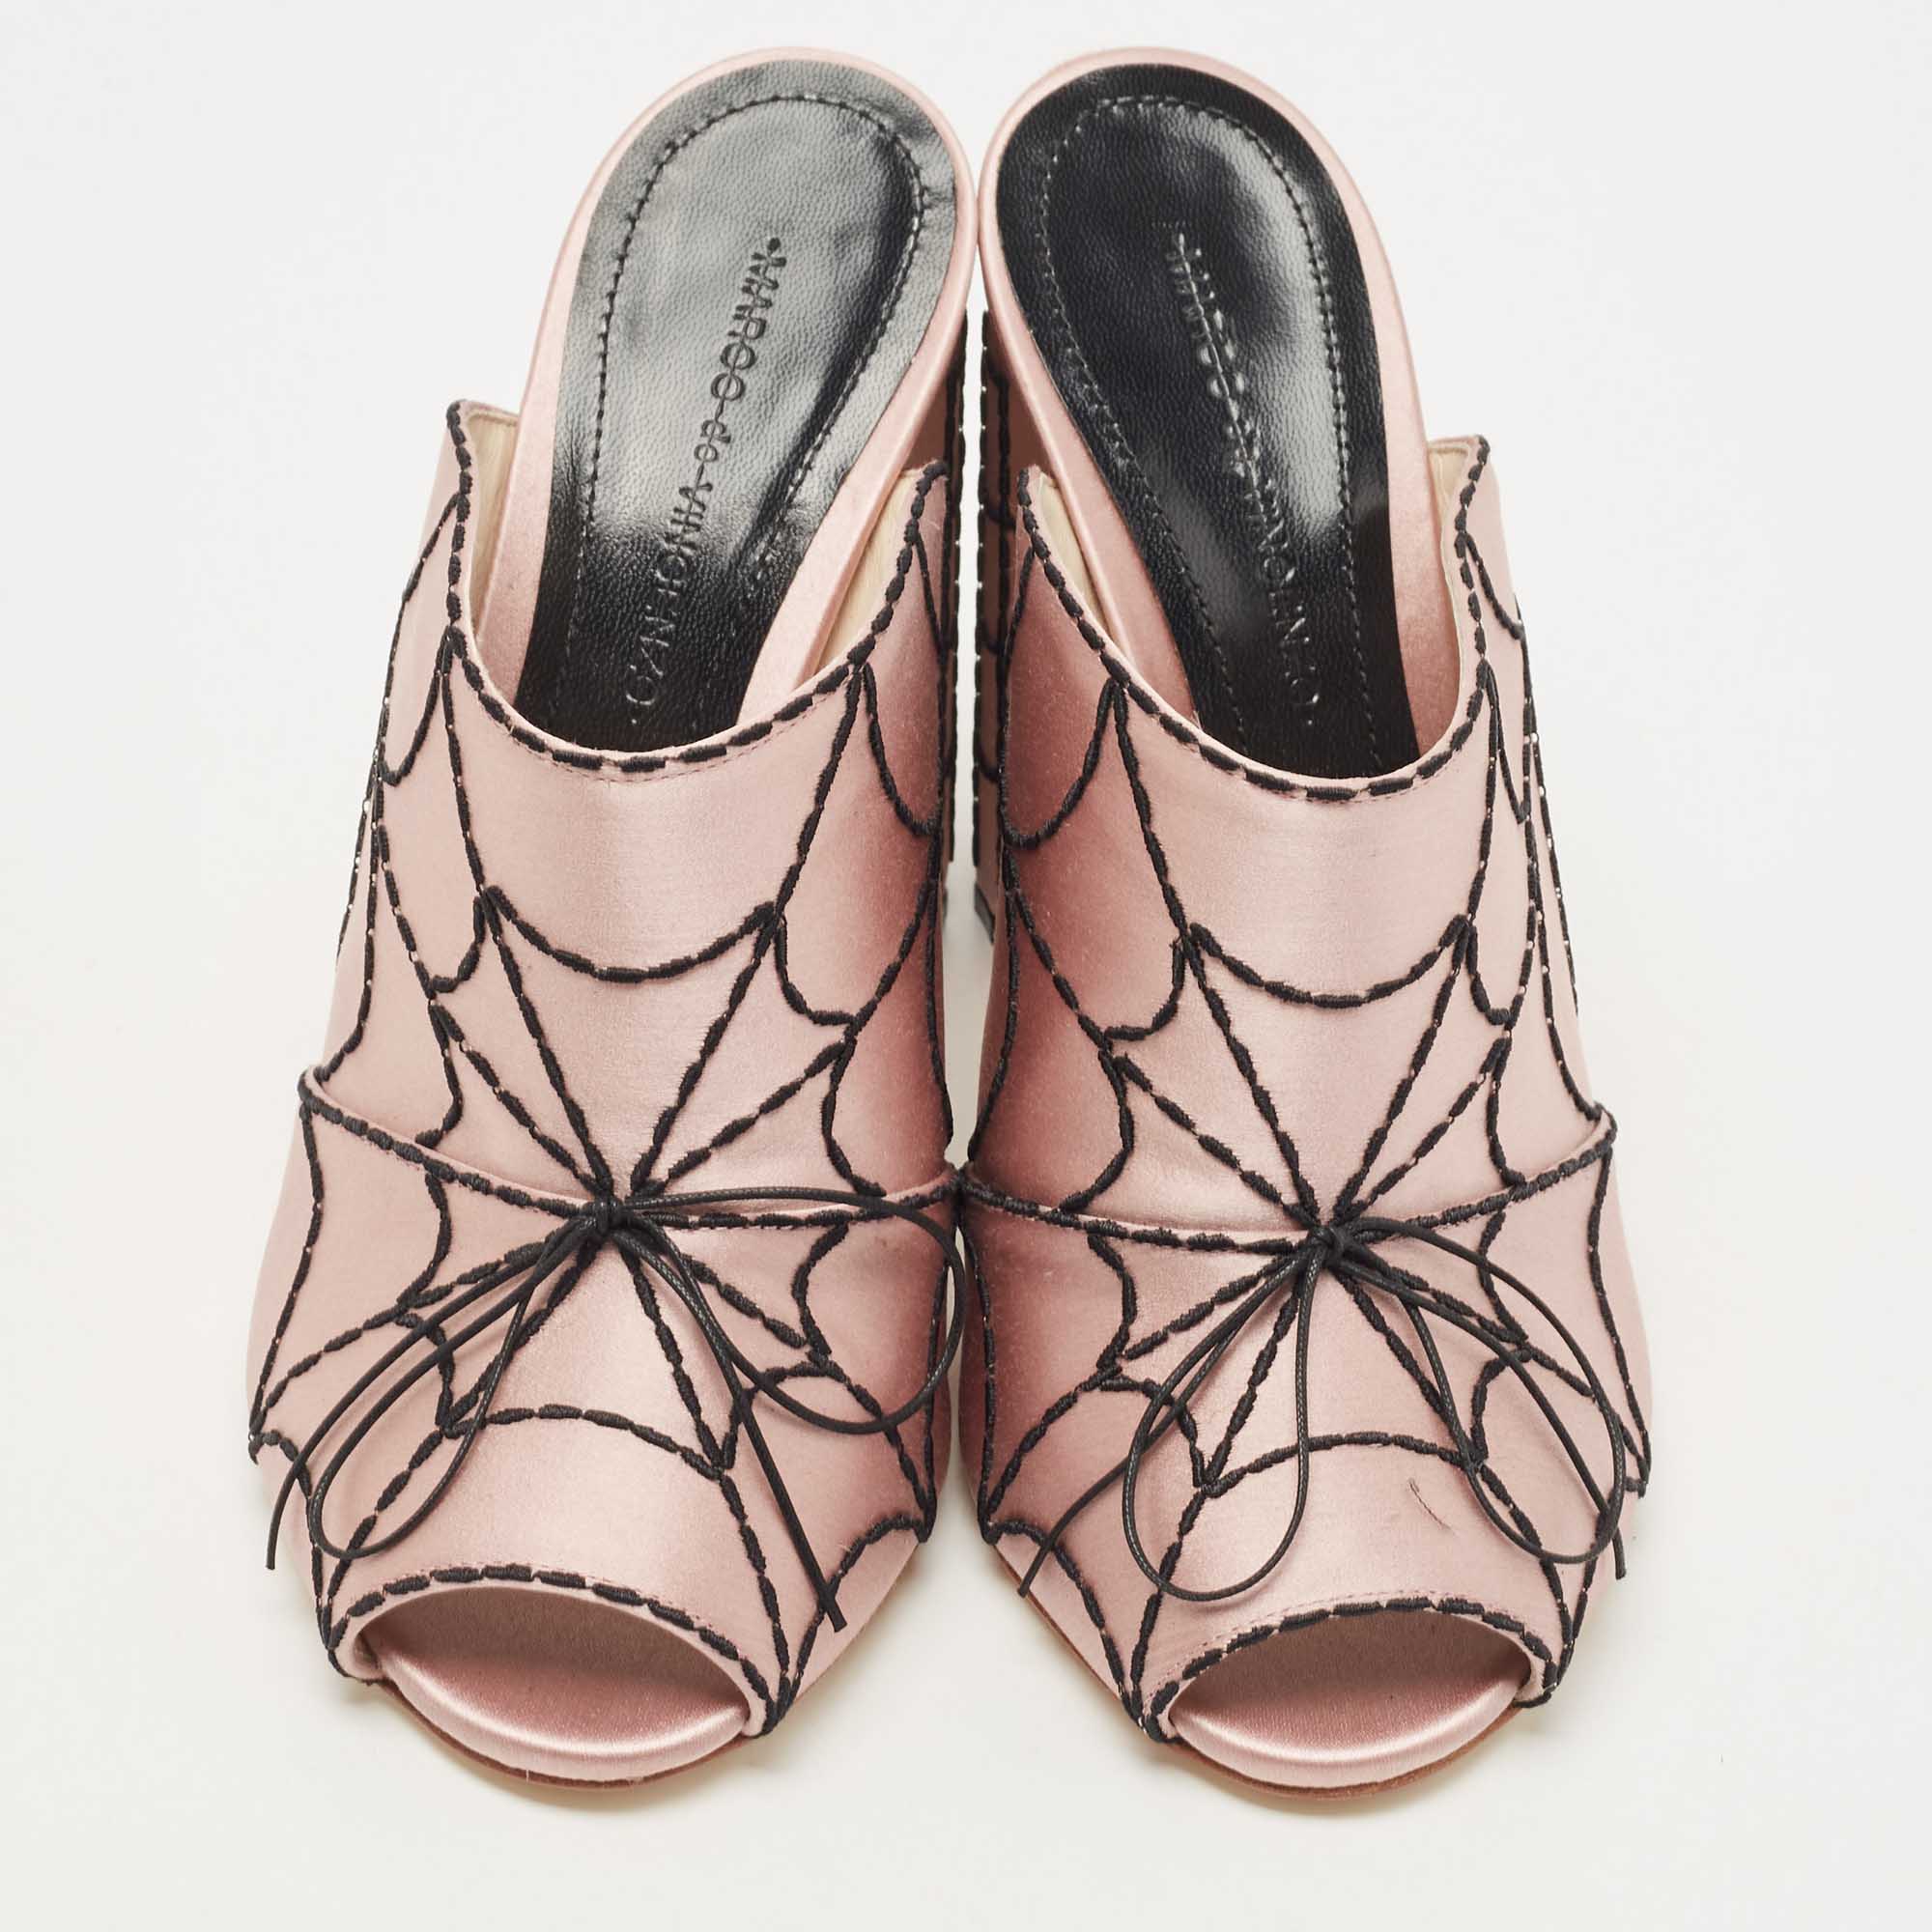 Marco De Vincenzo Pink Satin Embroidered Spider Web Mules Size 39